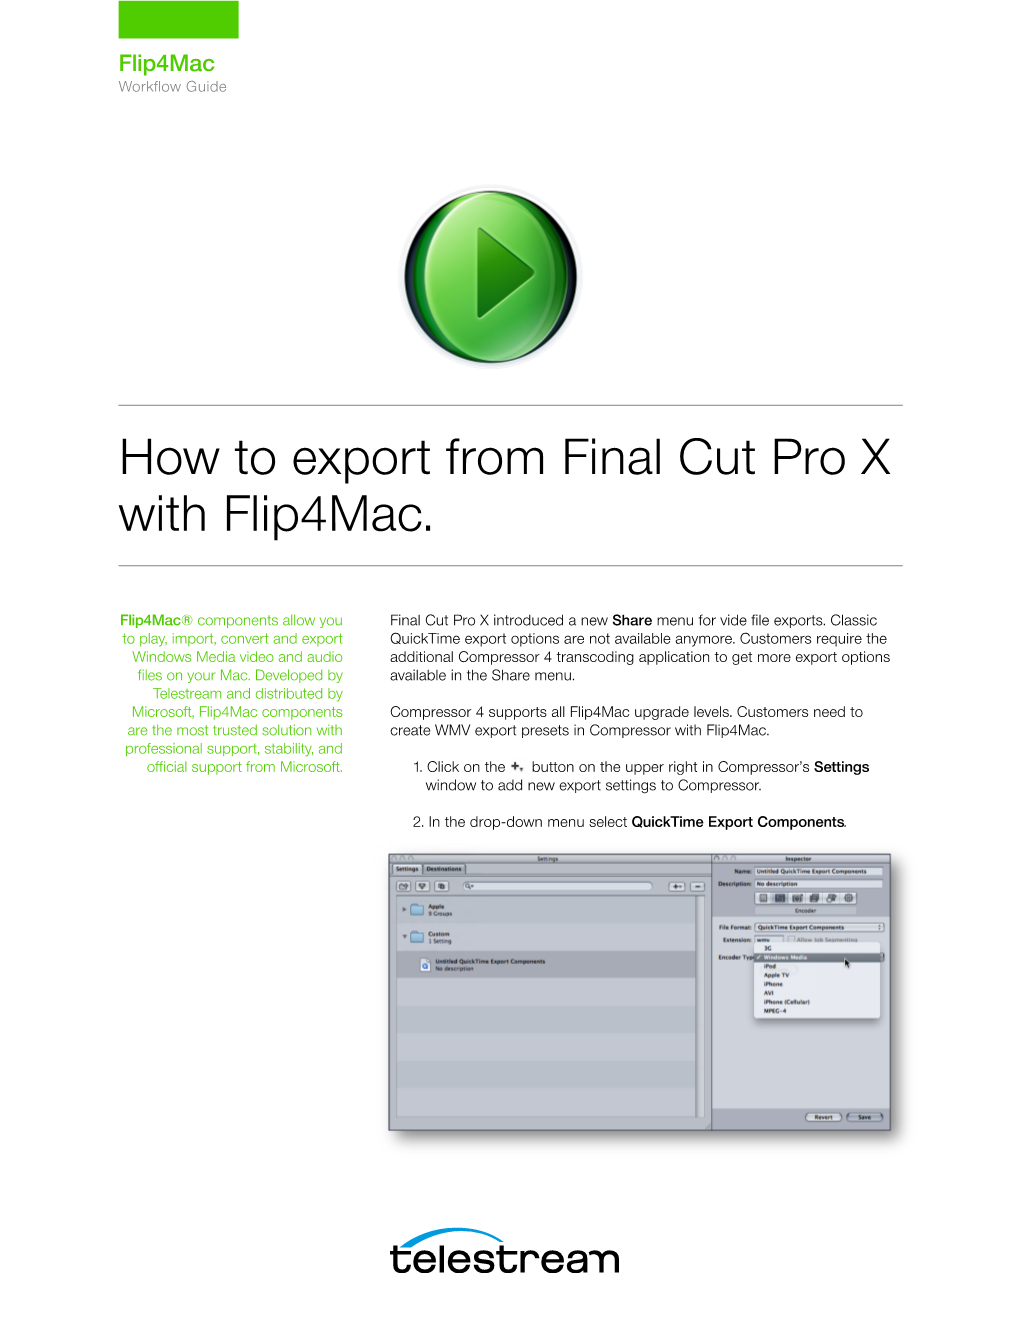 How to Export from Final Cut Pro X with Flip4mac